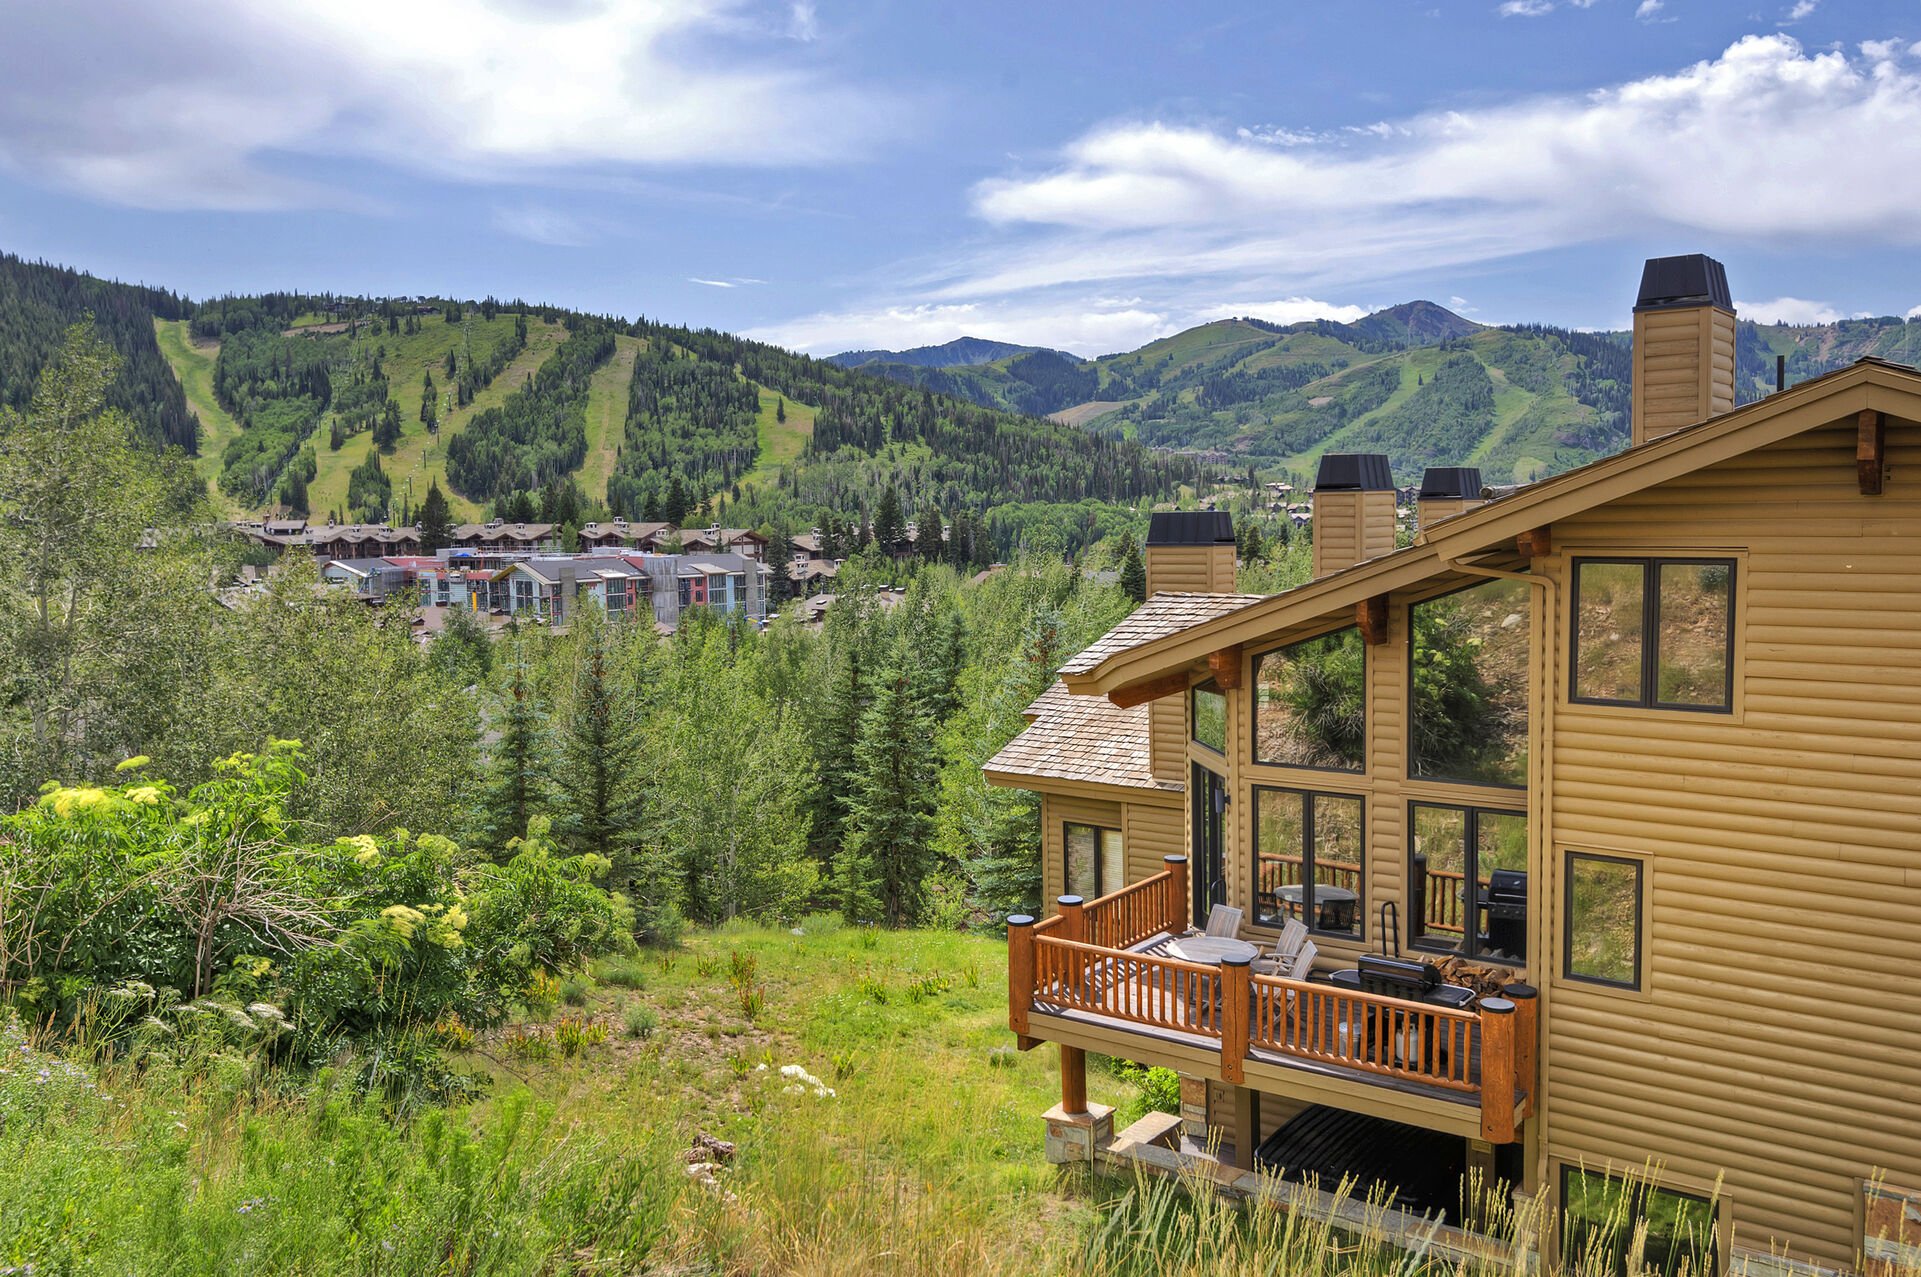 Take in the Beauty that is Park City and Deer Valley